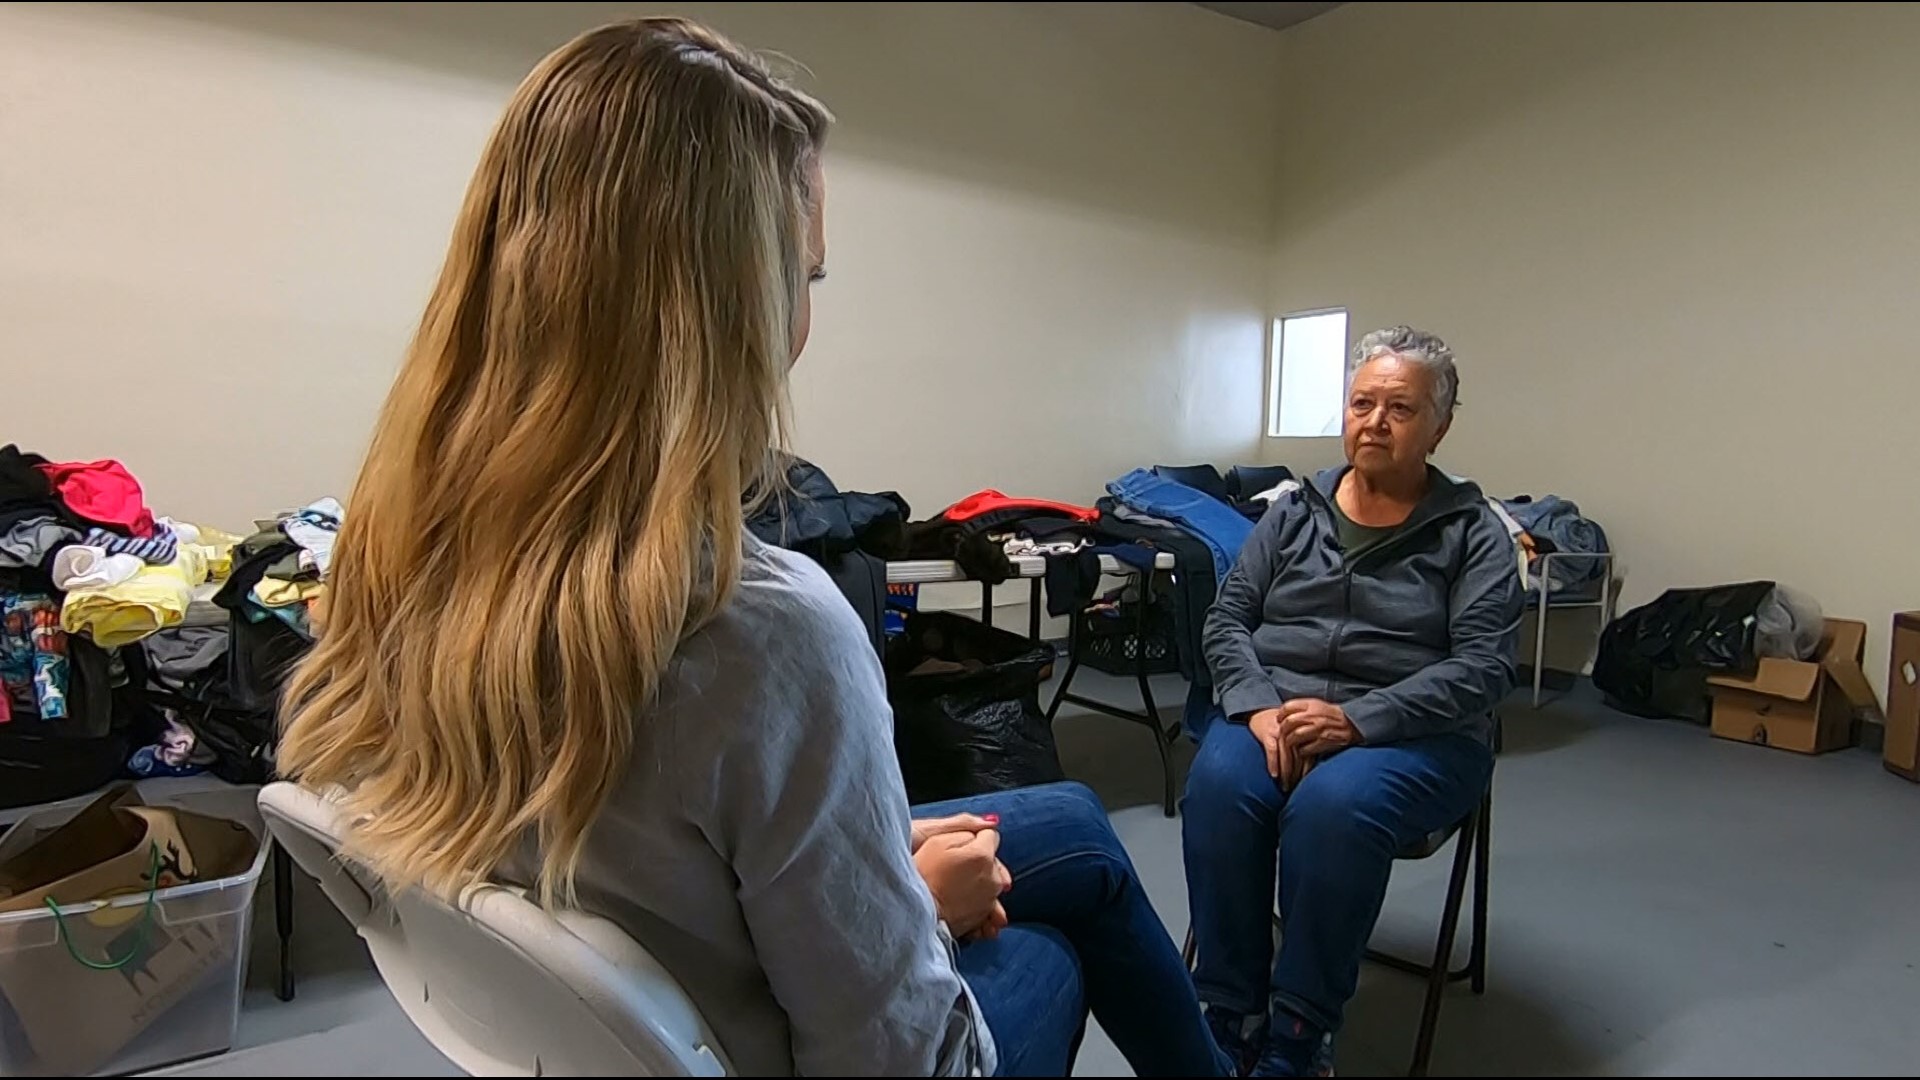 Maria Galleta is the founder of Madres Deportados en Accion, or Deported Mothers in Action, a drop in center located in Tijuana.